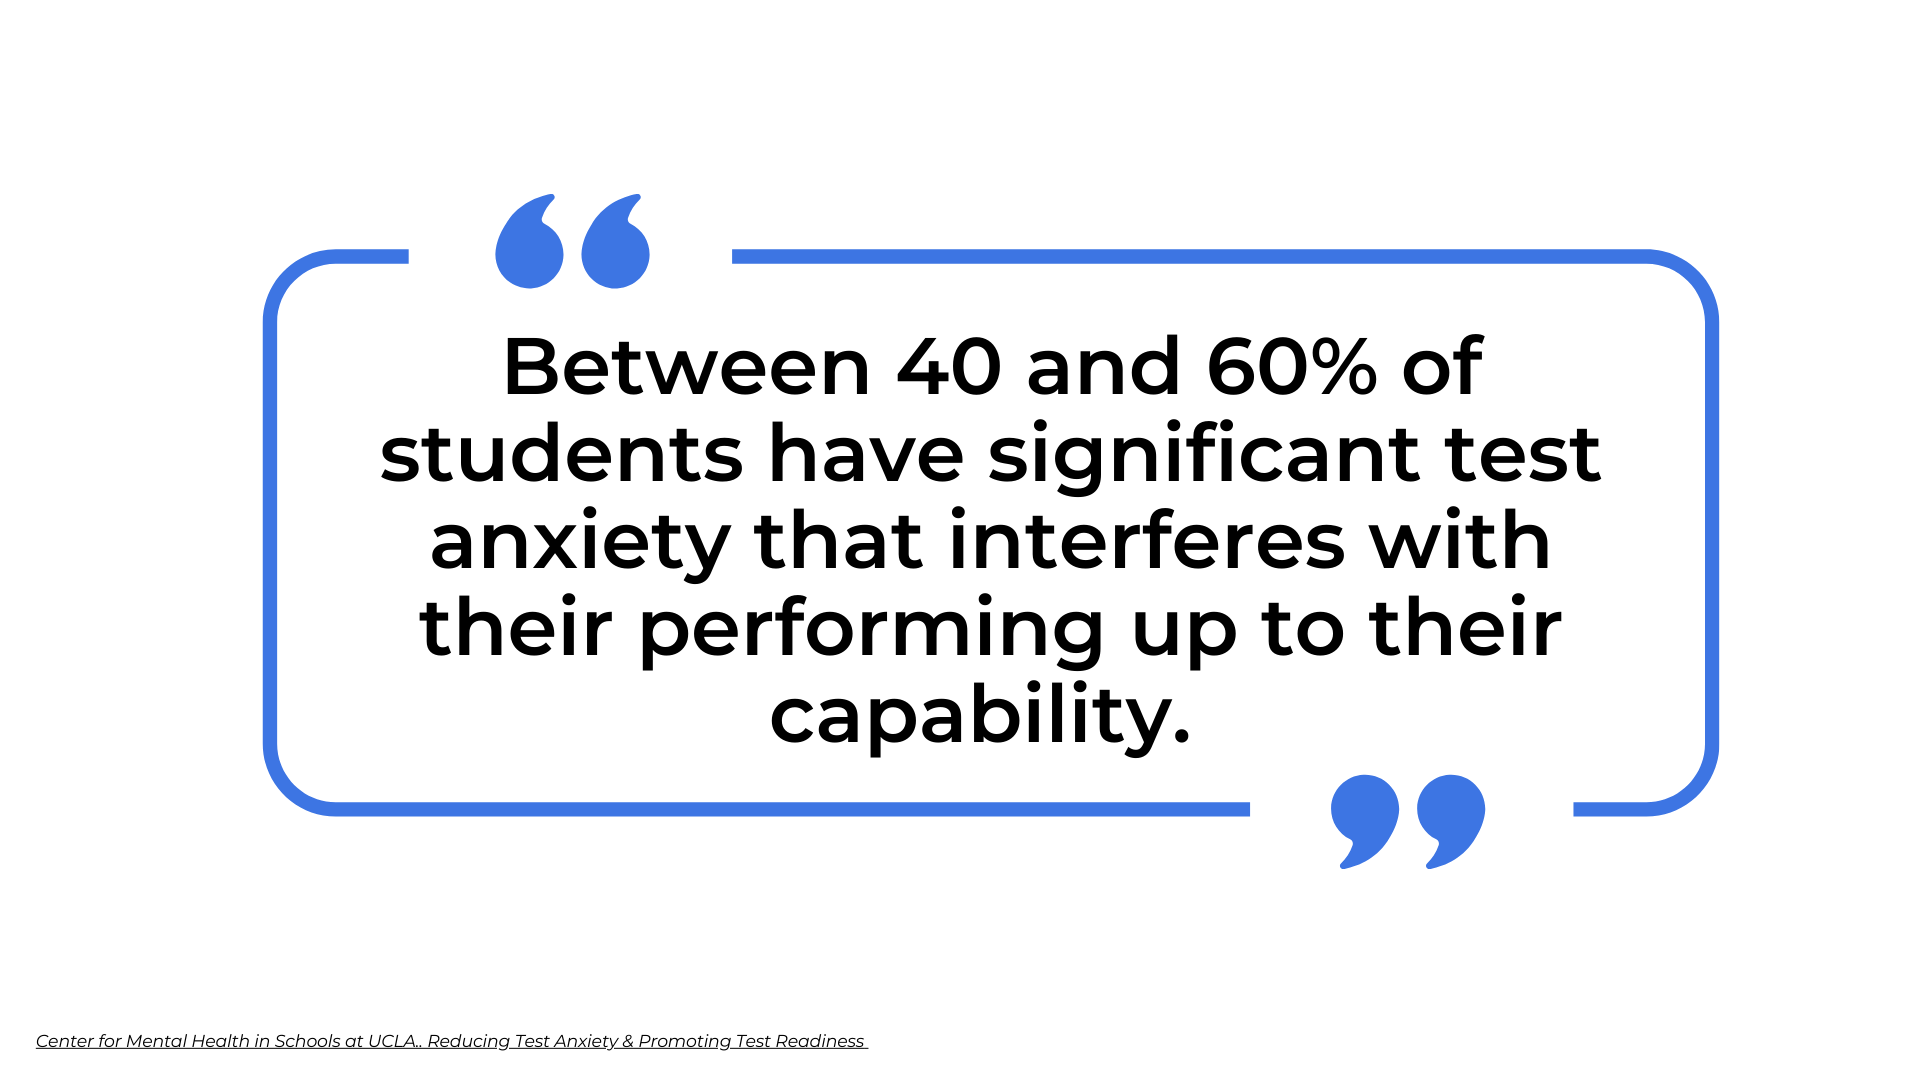 Quote: Between 40 and 60% of students have significant test anxiety that interferes with their performing up to their capability.